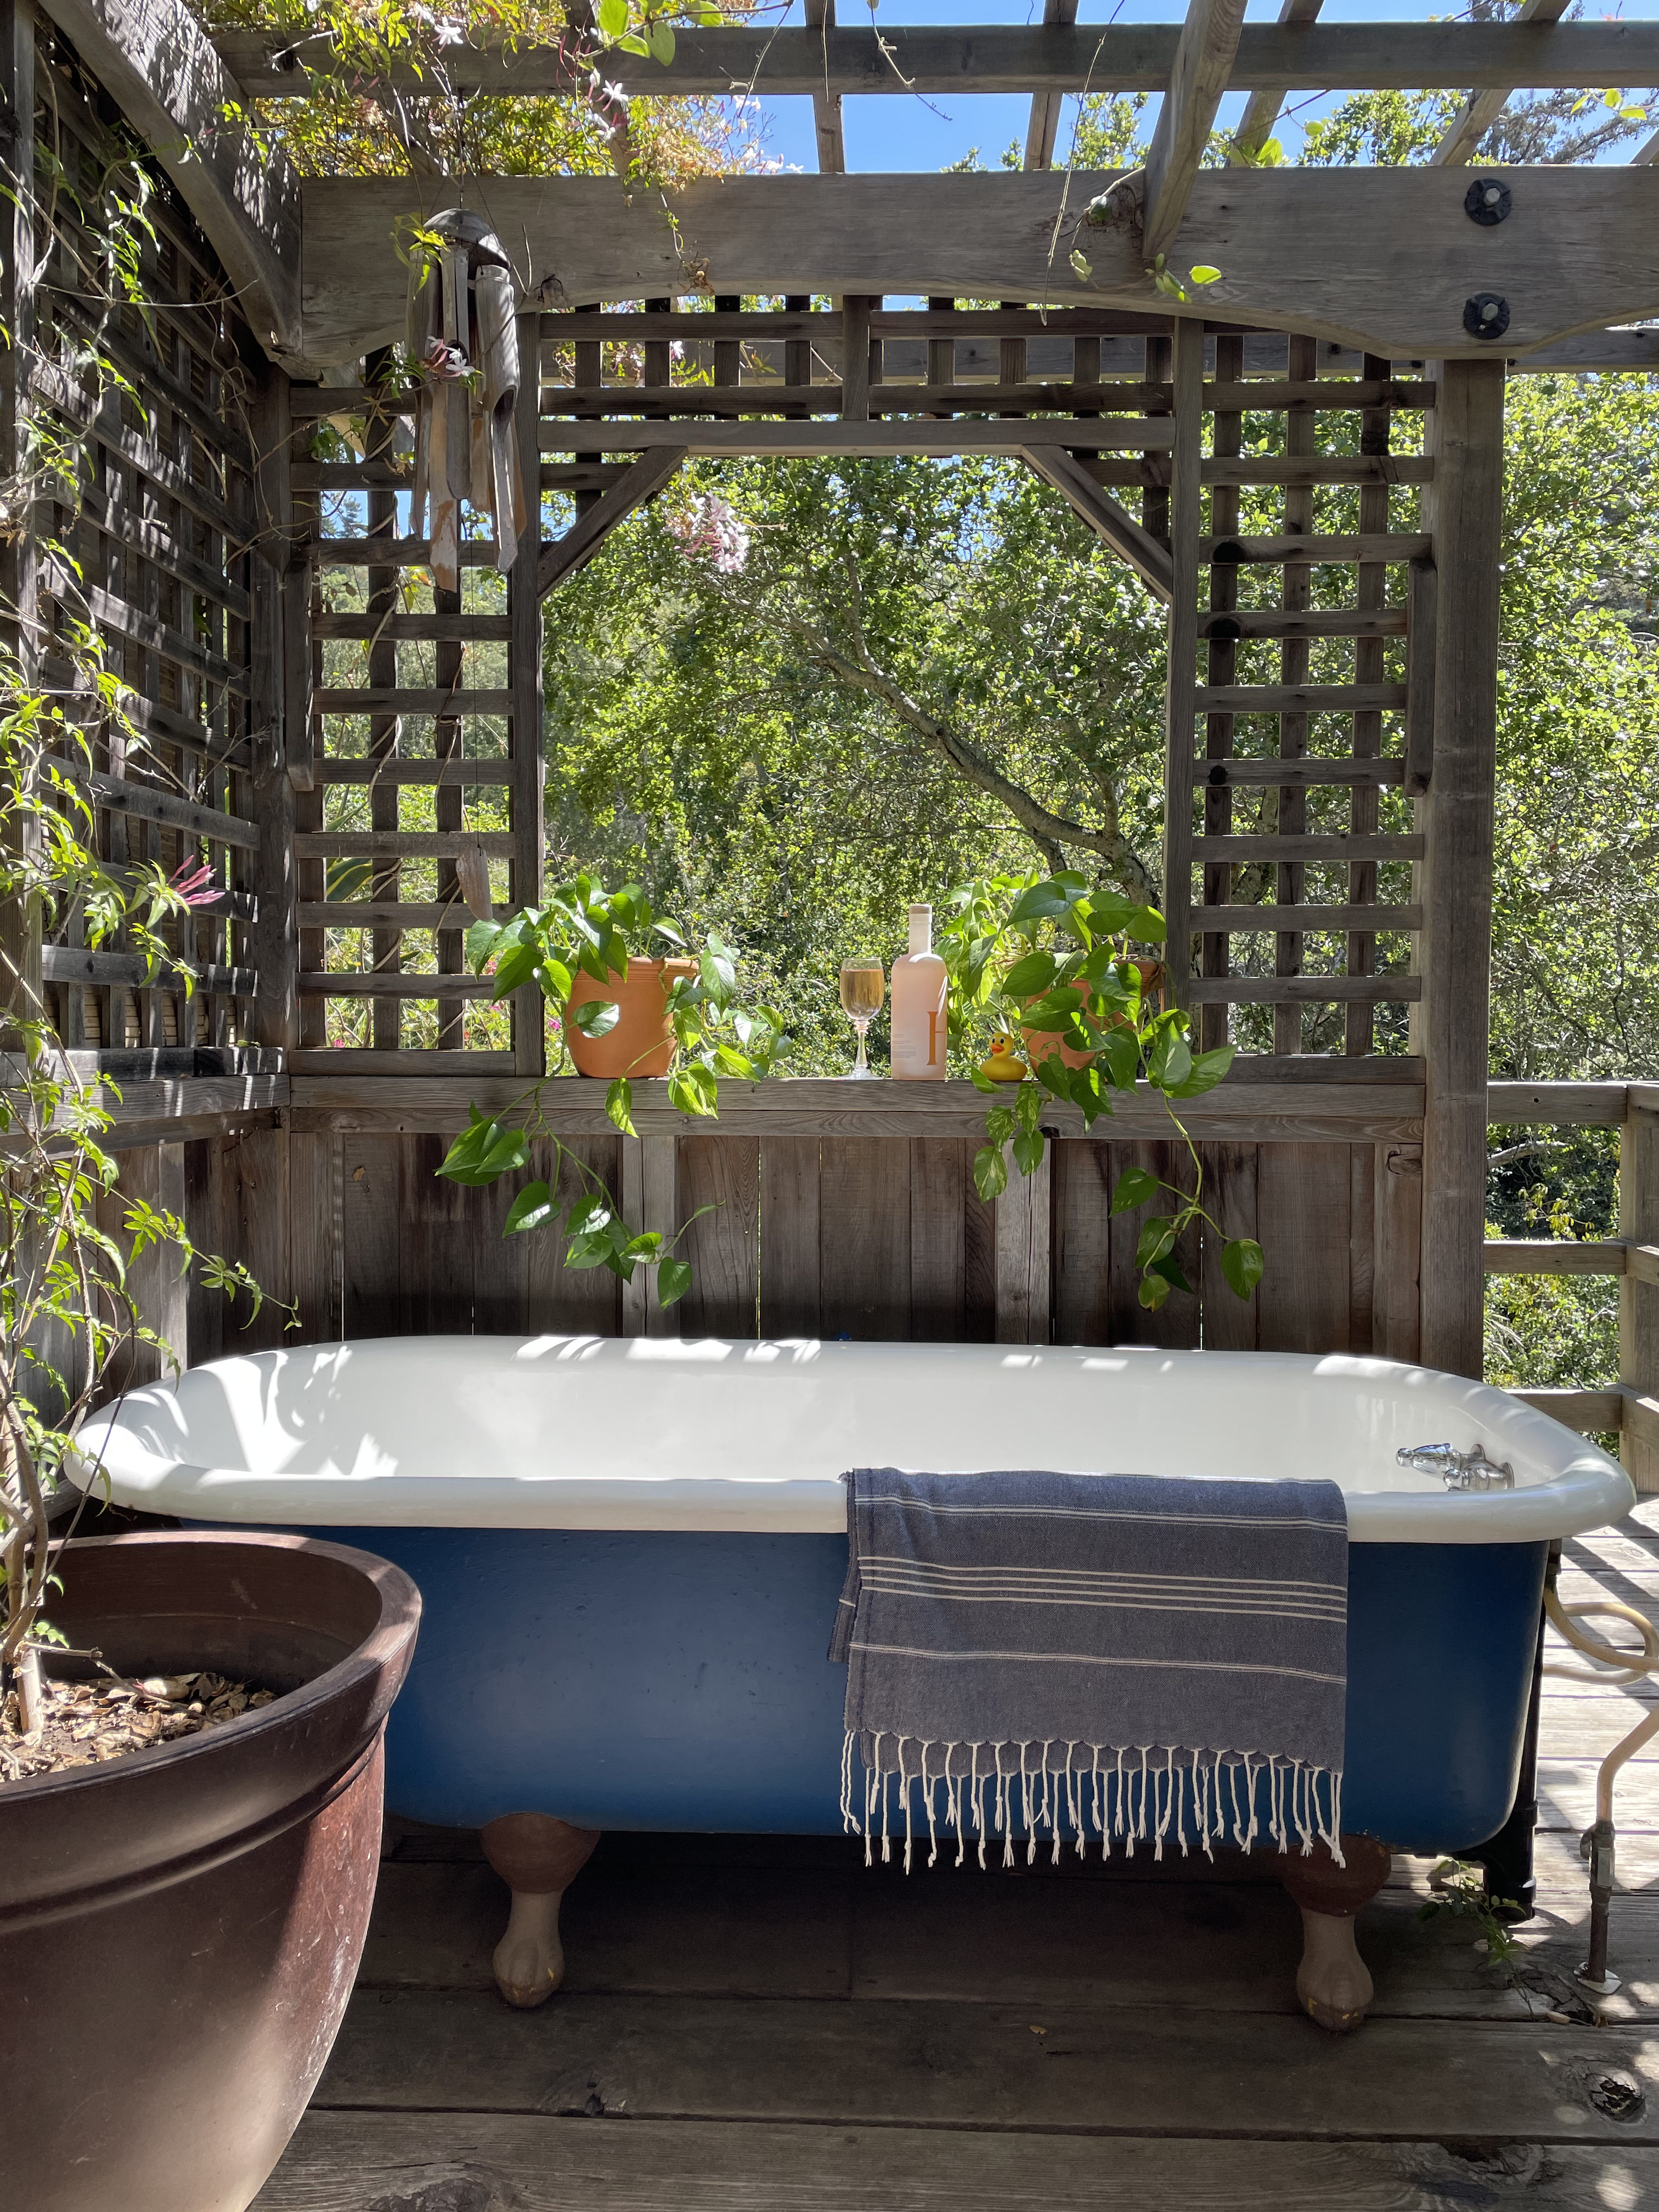 An Outdoor Bathtub Is the Sensory Experience You Need - Sunset Magazine